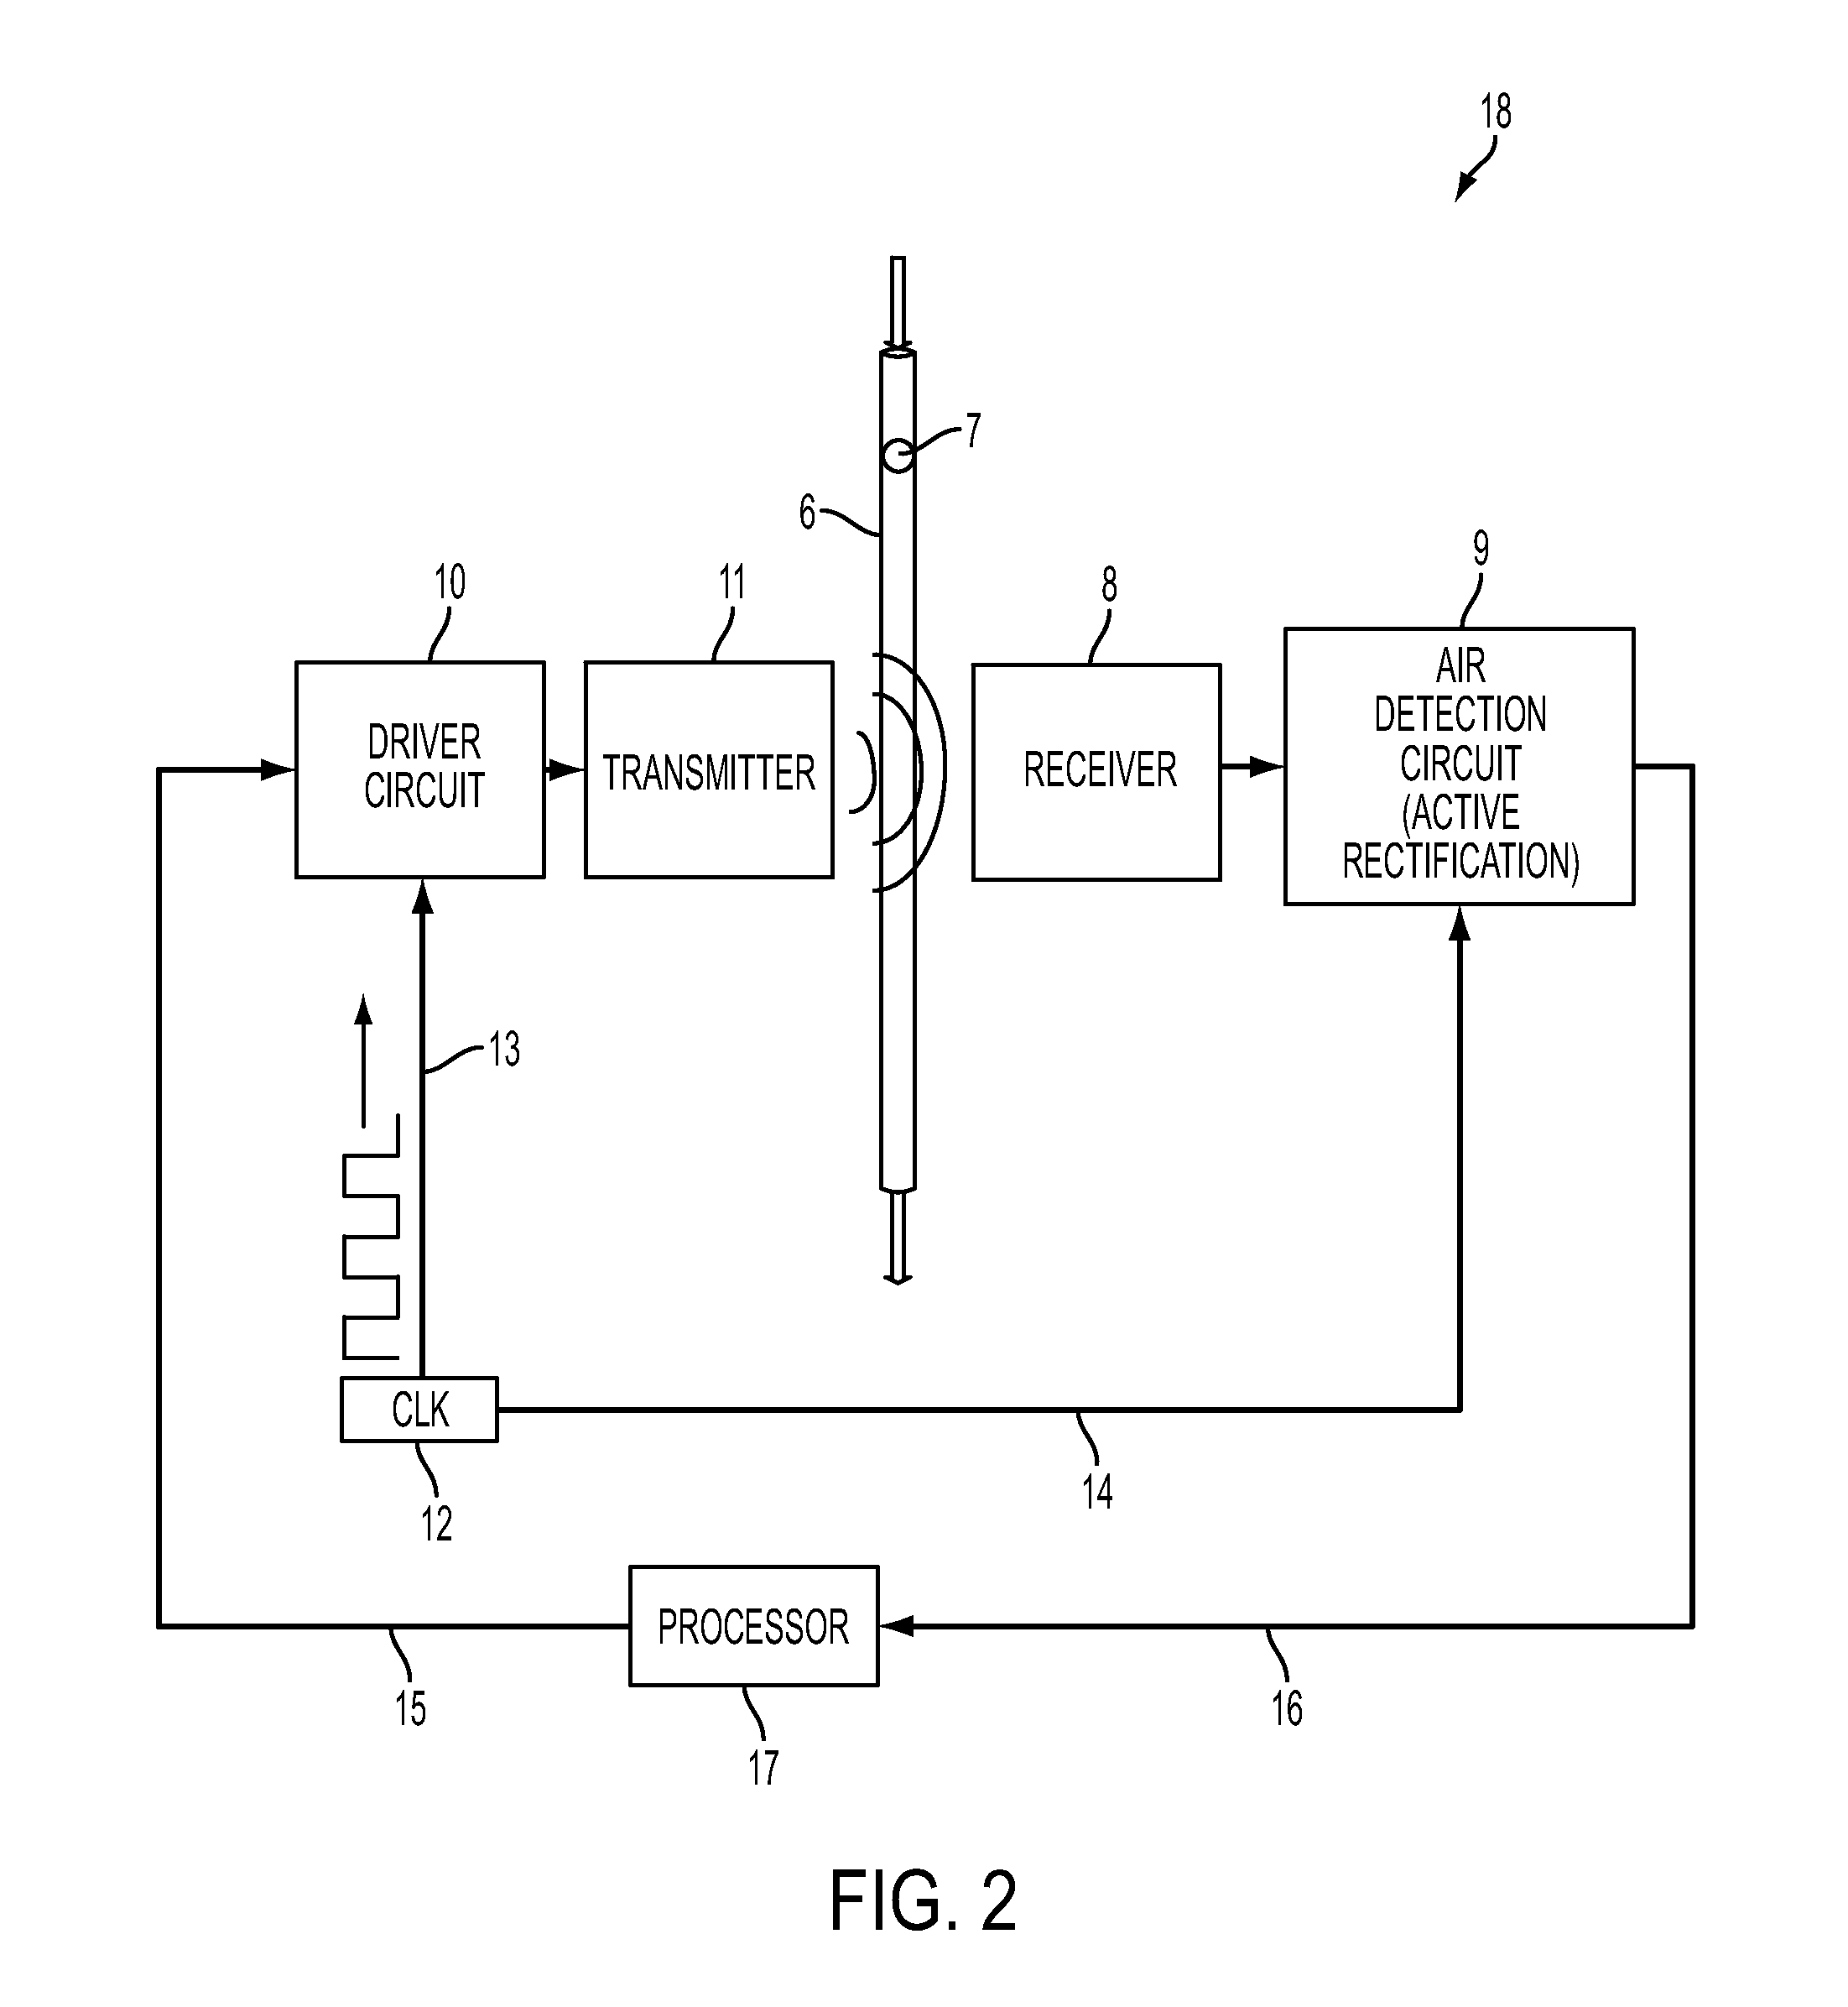 System, Method, and Apparatus for Detecting Air in a Fluid Line Using Active Rectification